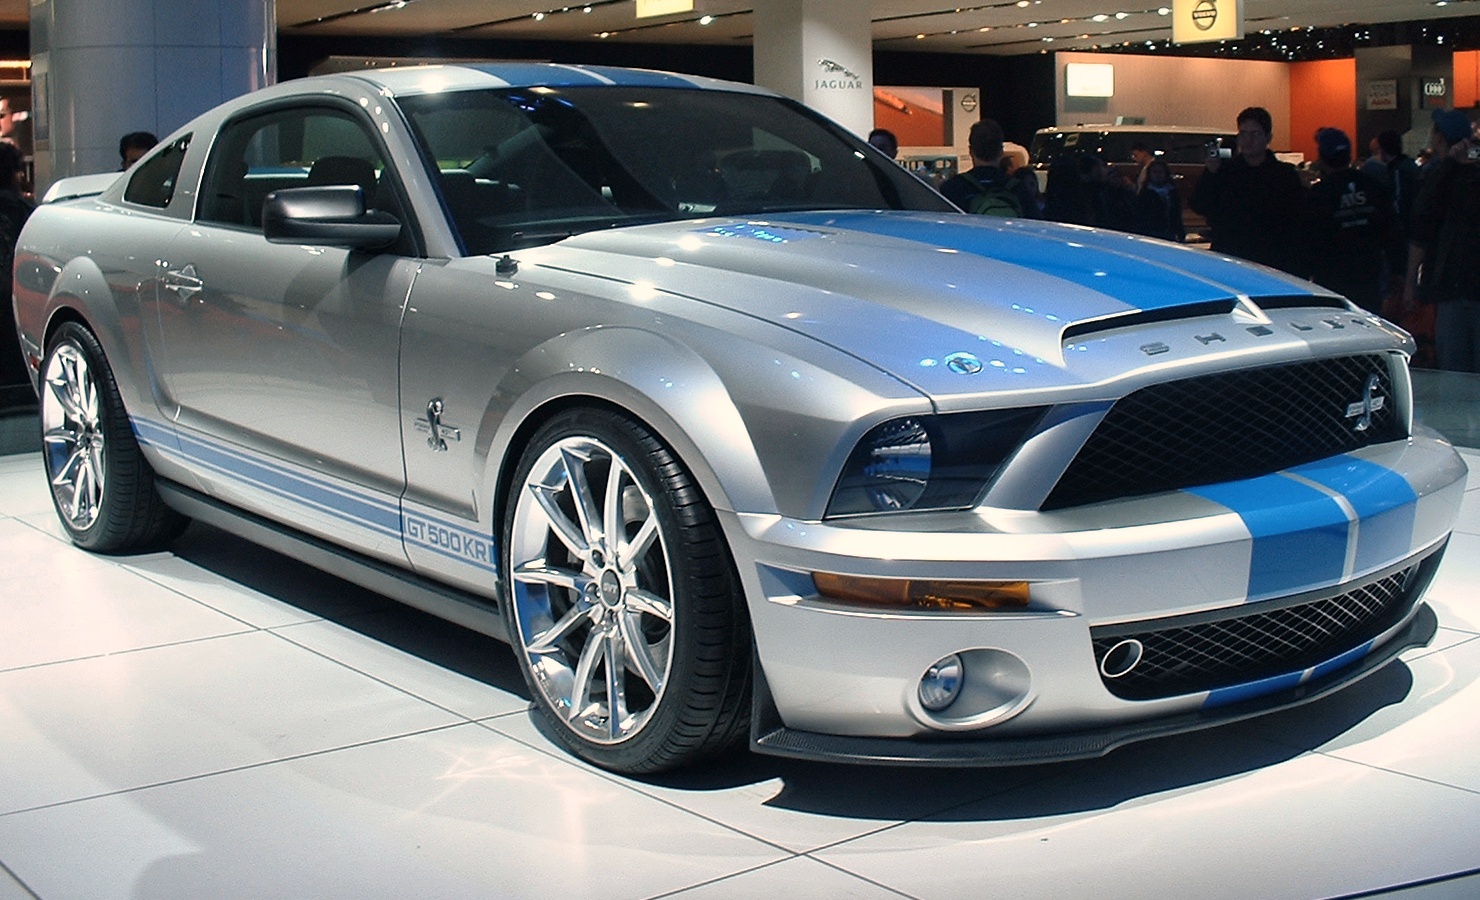 File:Shelby GT500KR at NYIAS.jpg - Wikimedia Commons